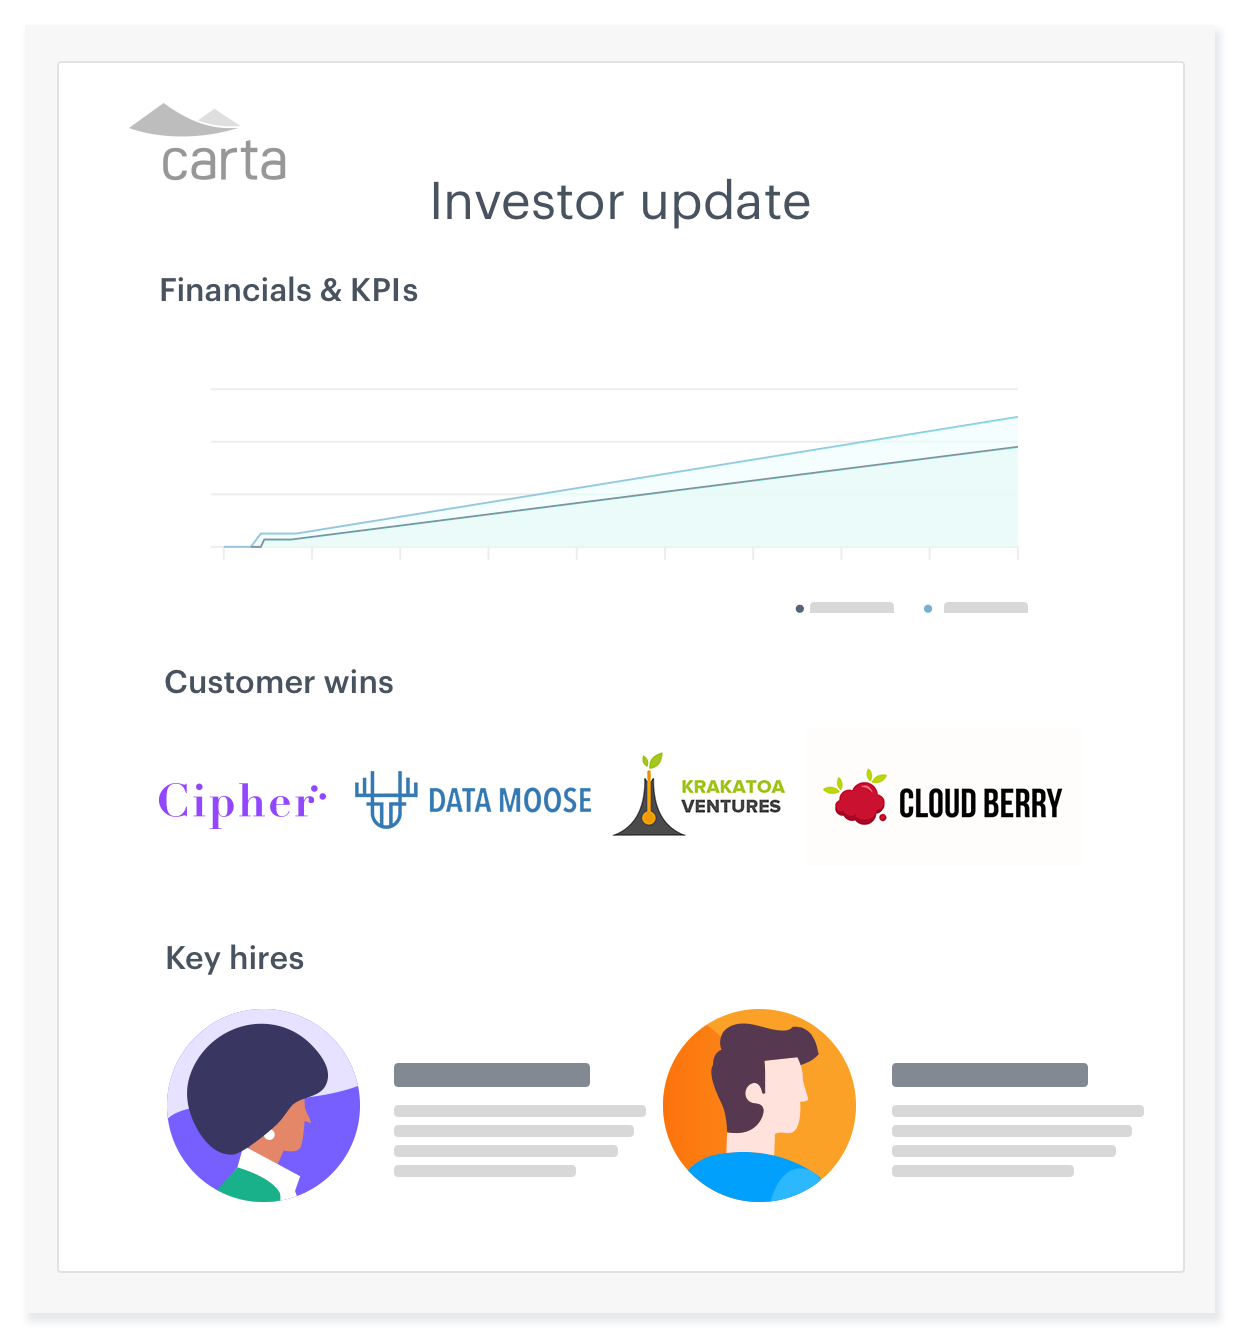 How to write a great investor update (templates & tips)